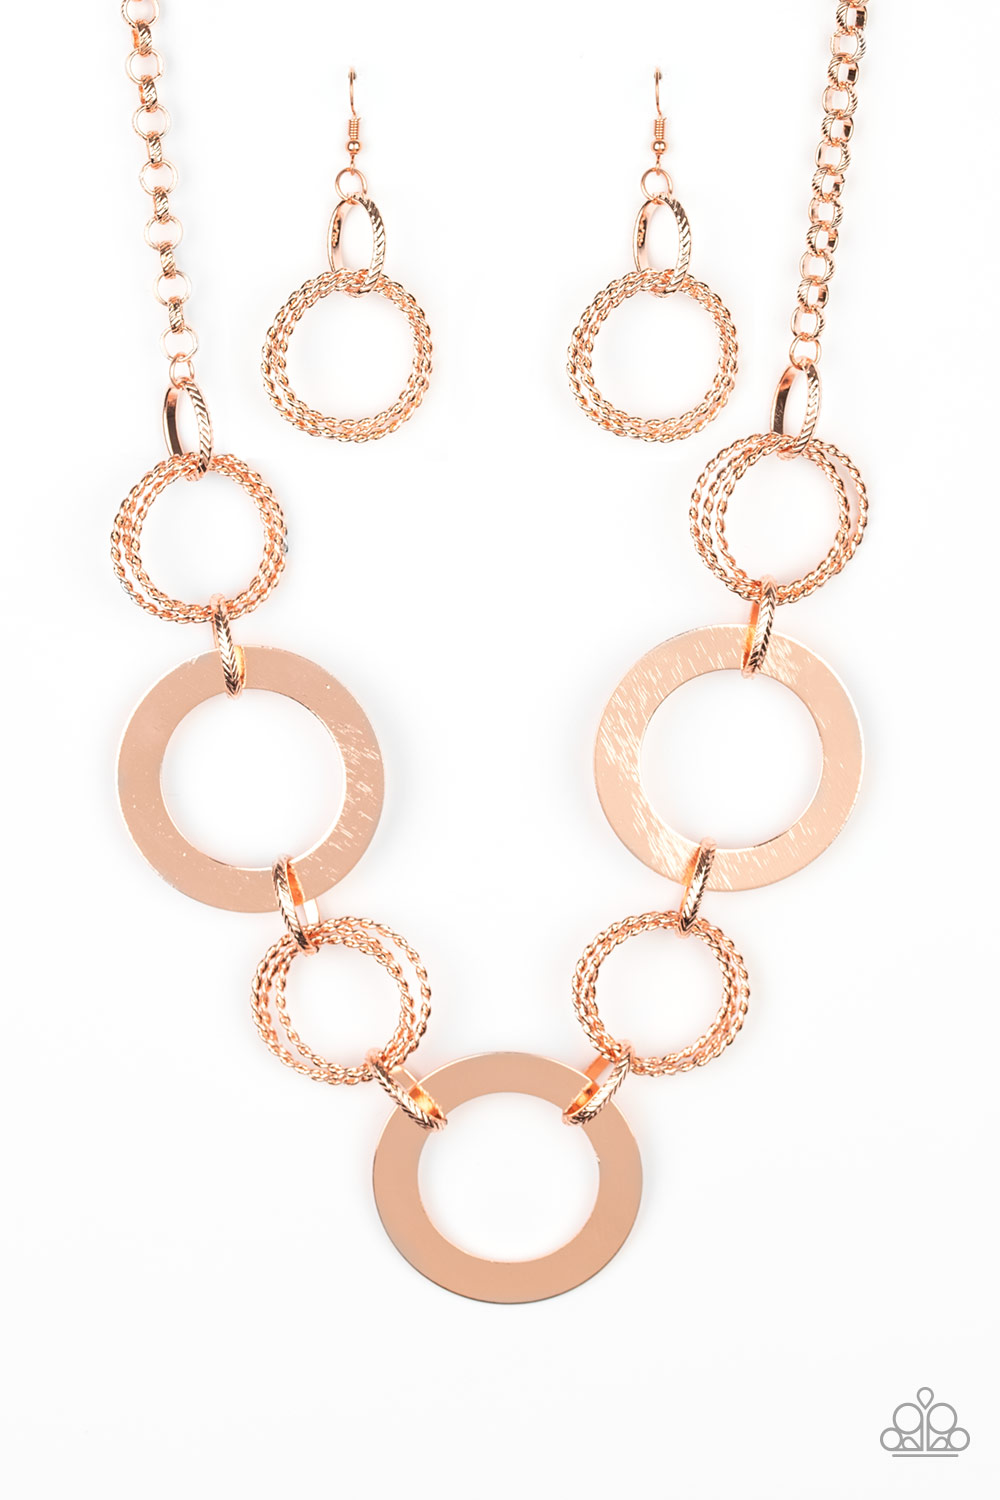 Paparazzi Accessories: Ringed in Radiance - Copper | Paparazzi Accessories